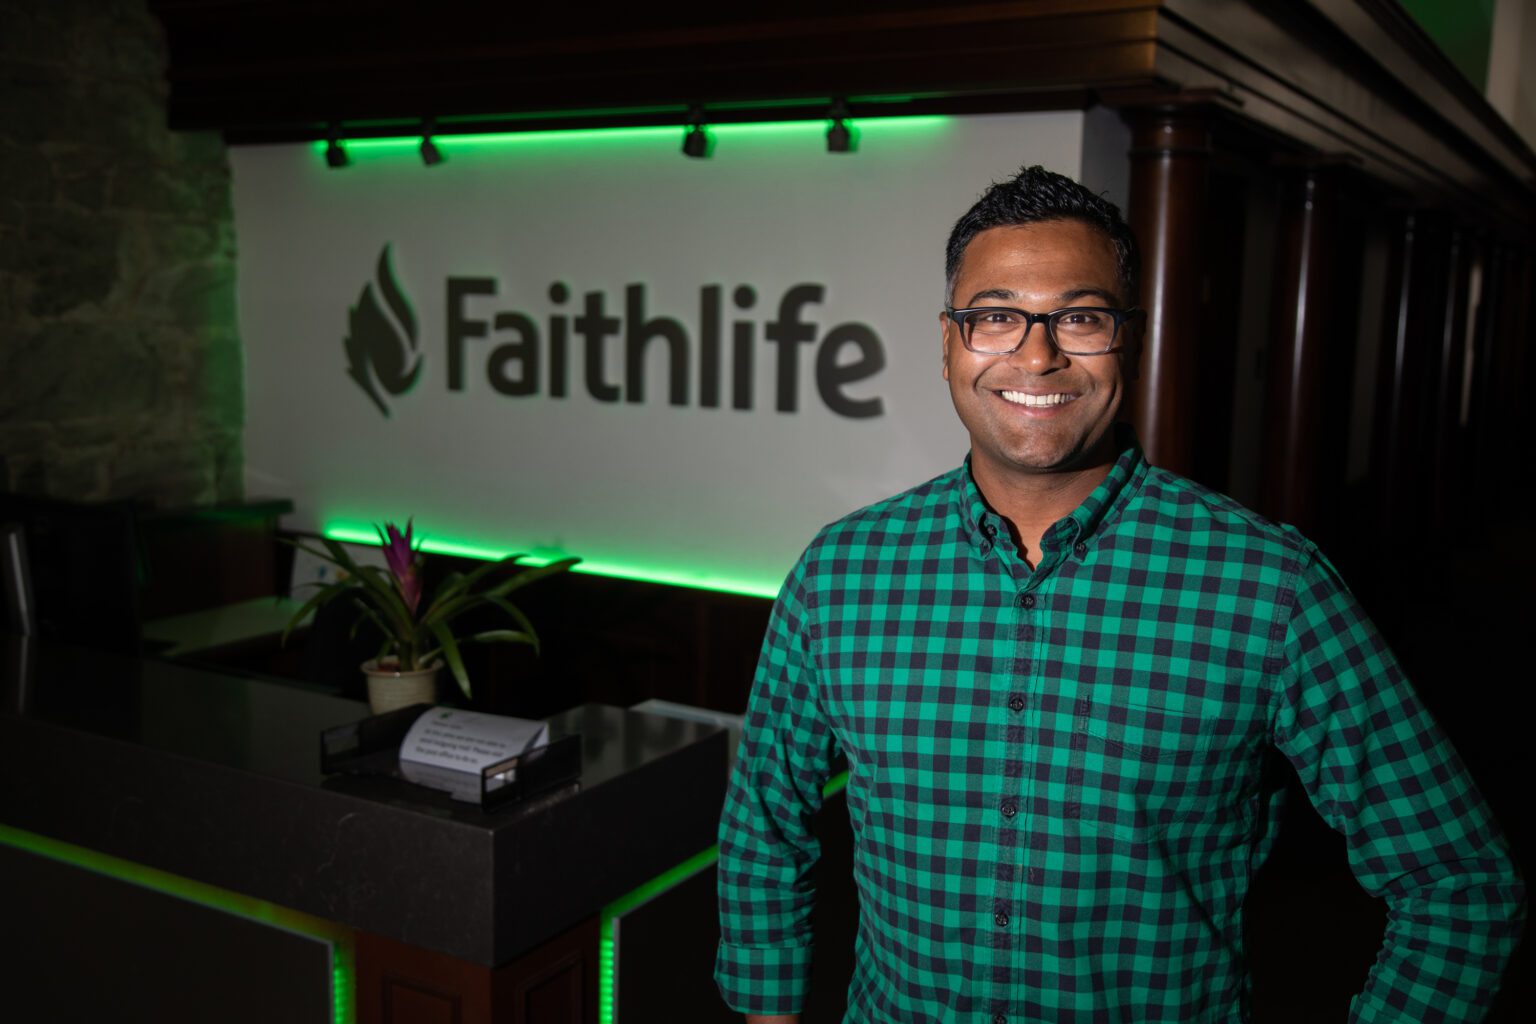 A man wearing glasses and a green and black checkered shirt smiles for a photo in a green-lit room. The wall behind him reads "Faithlife."